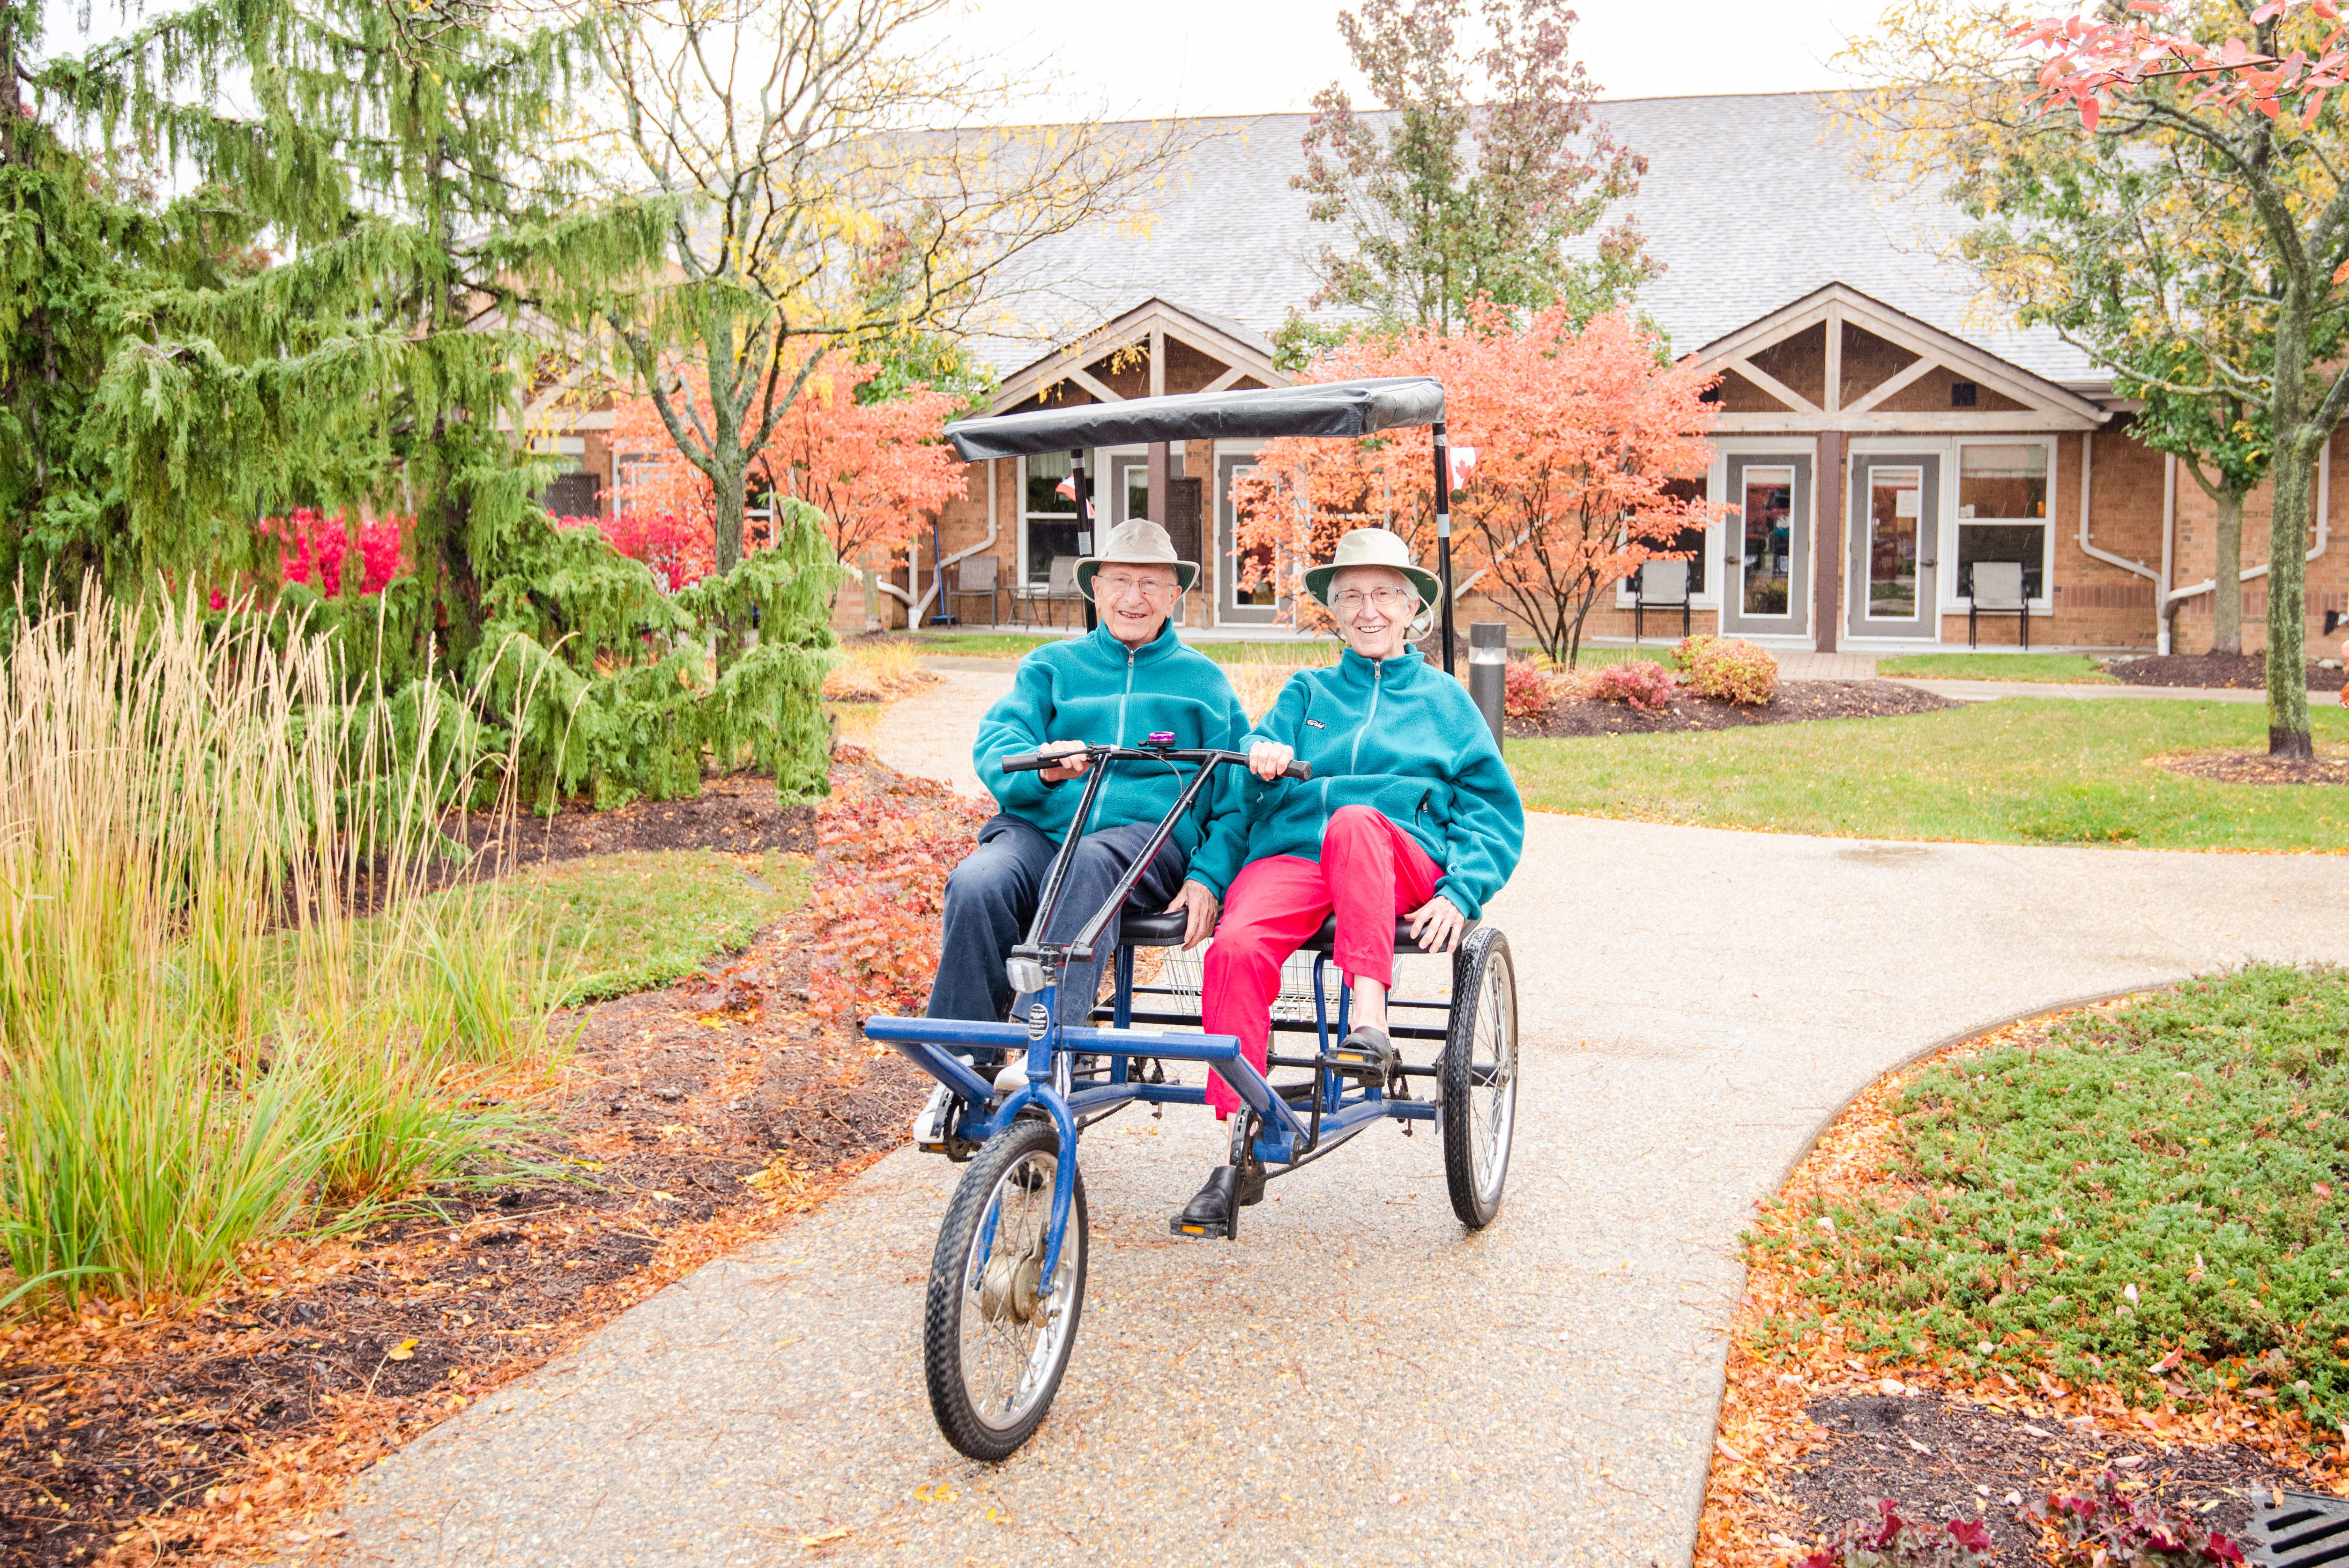 Residents riding a duet bike in the village courtyard